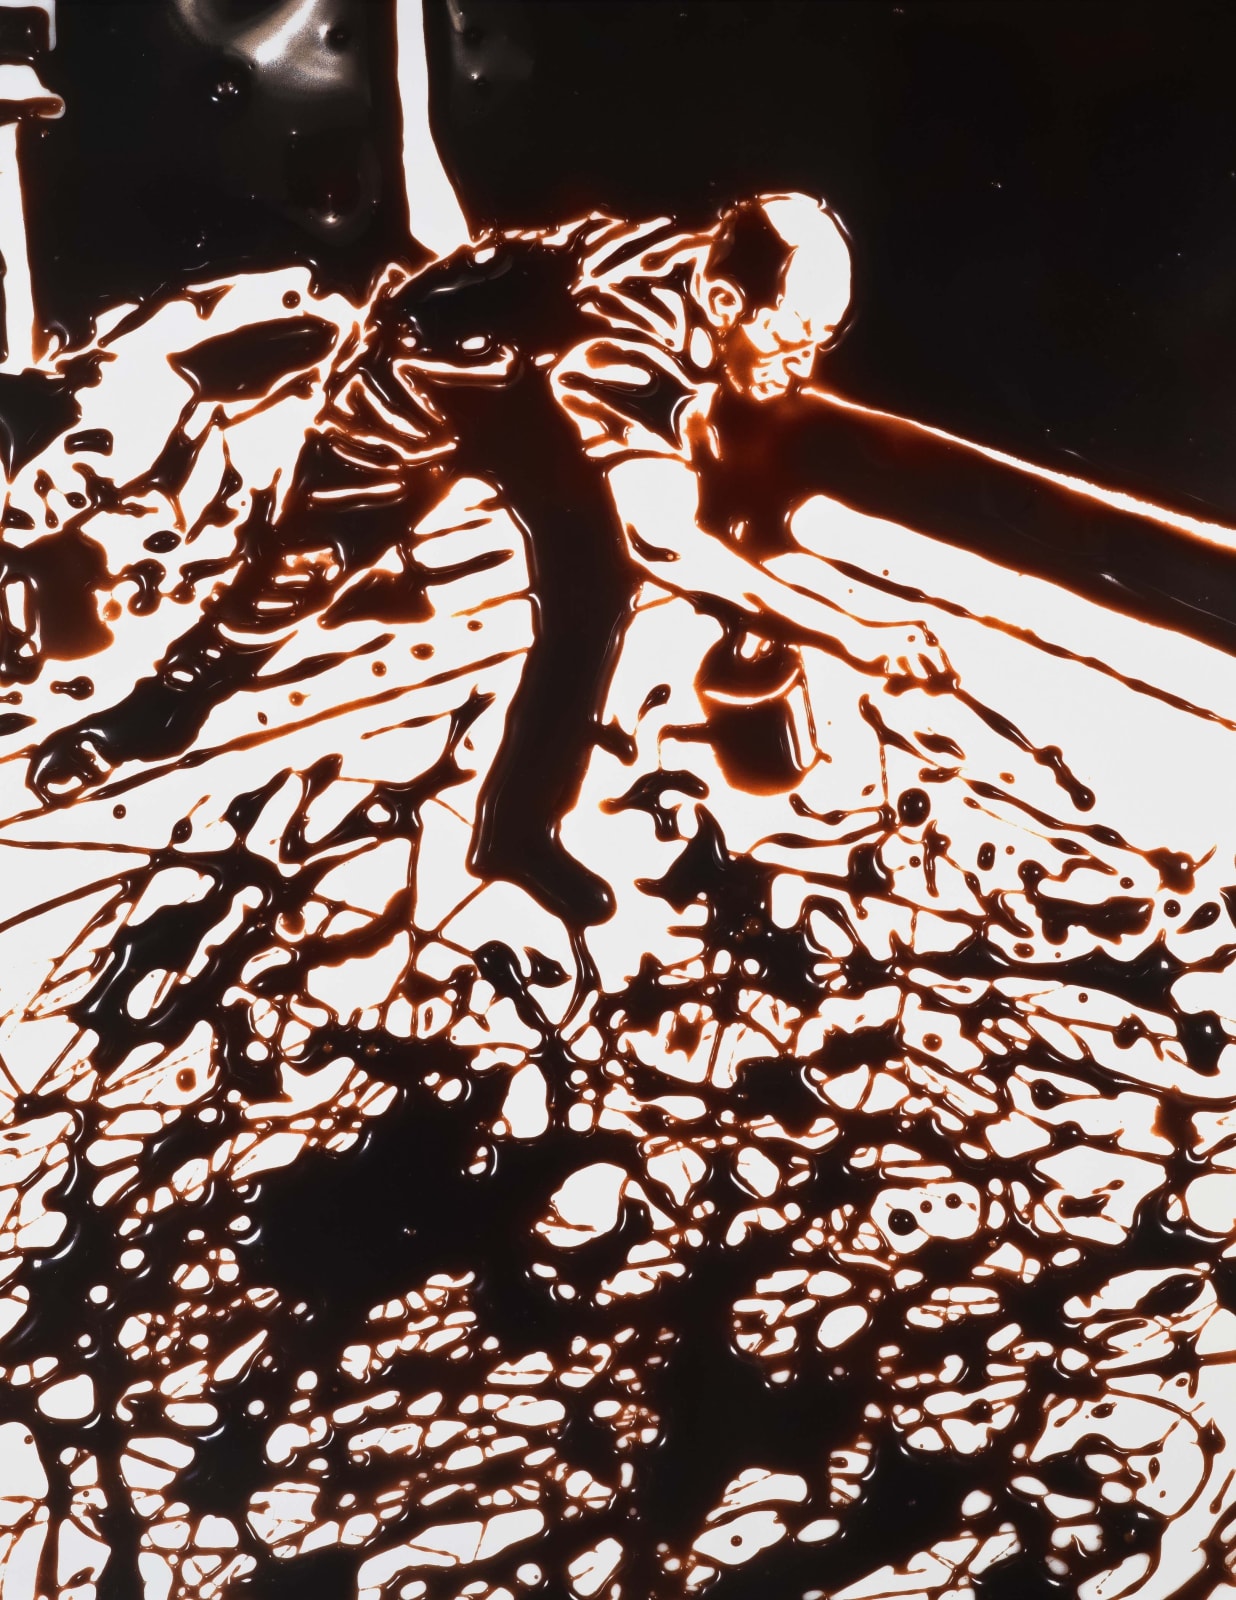 Vik Muniz photograph of Jackson Pollock making an action painting rendered in chocolate syrup against white background